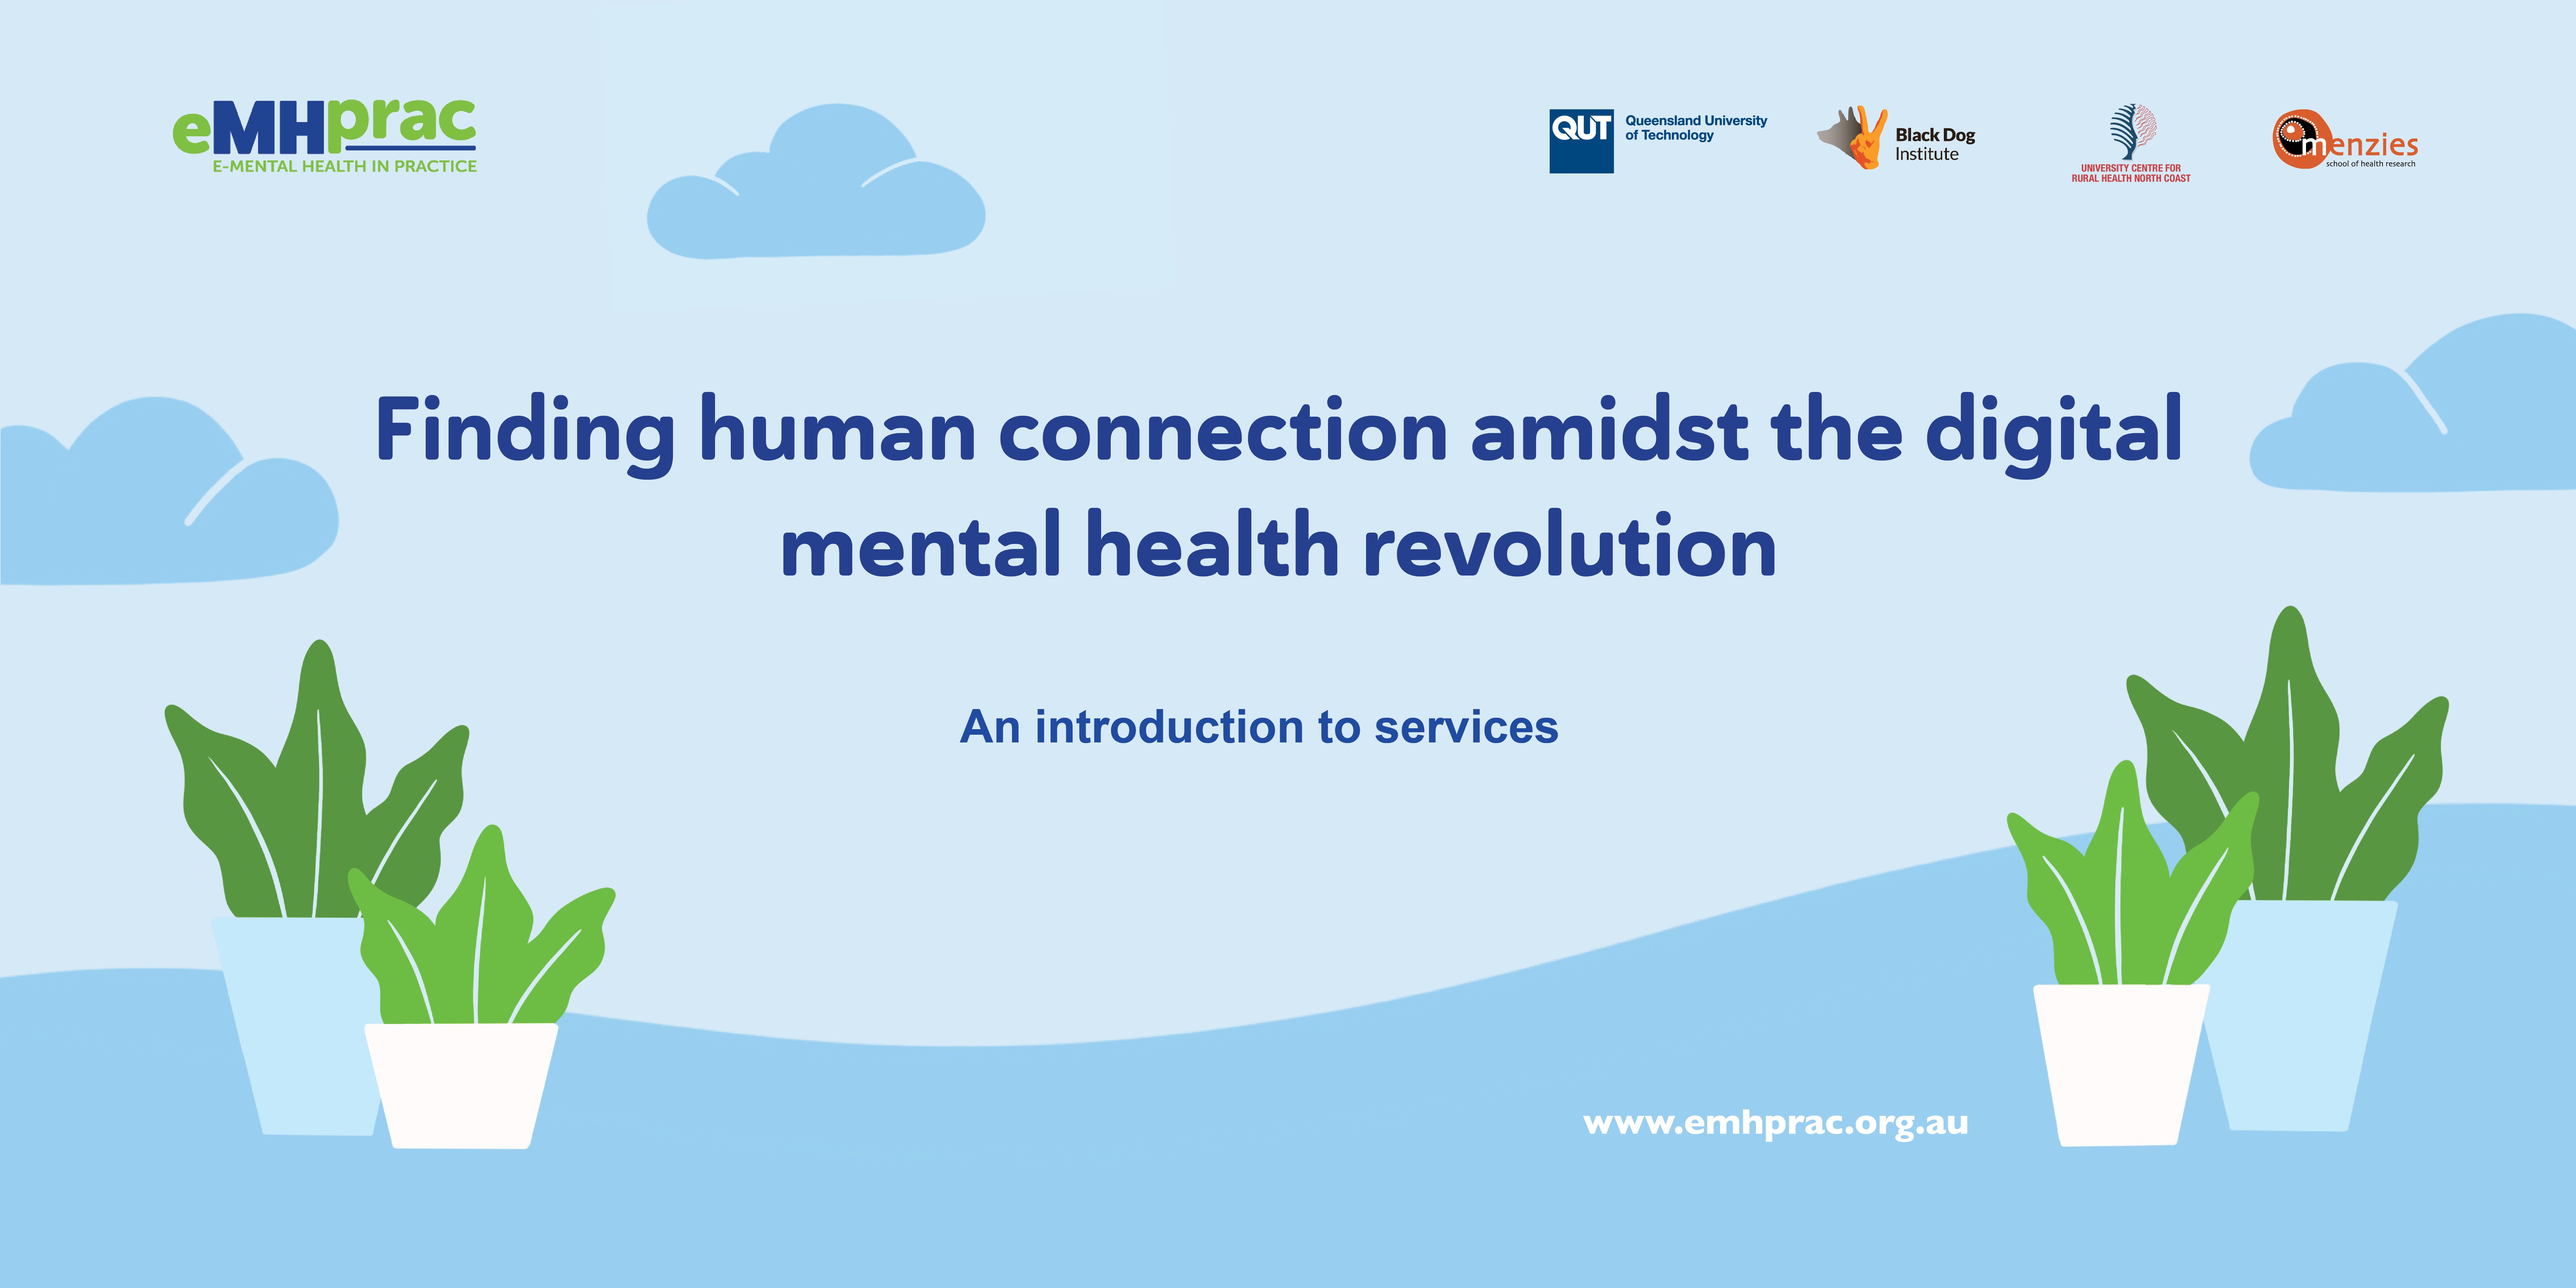 Finding human connection amidst the digital mental health revolution - an introduction to services